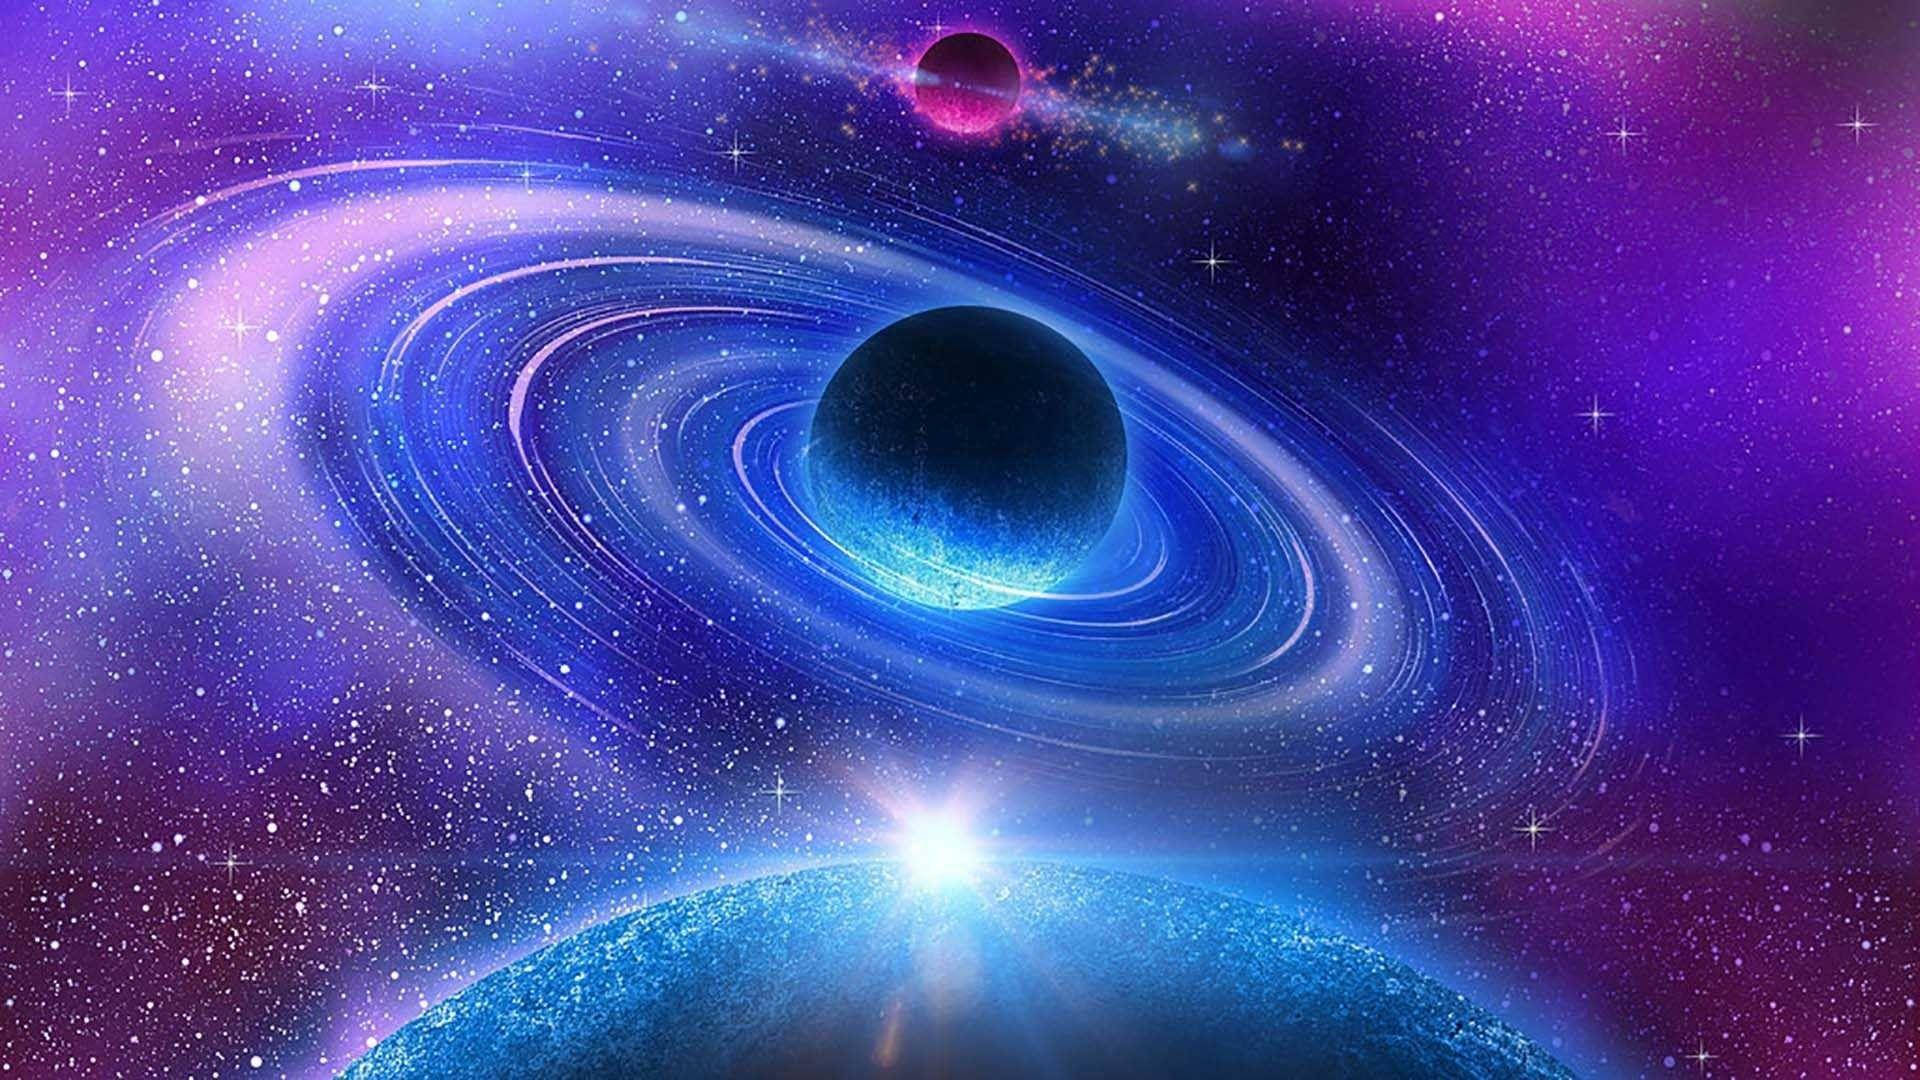 Cool Galaxy Ringed Planet Background